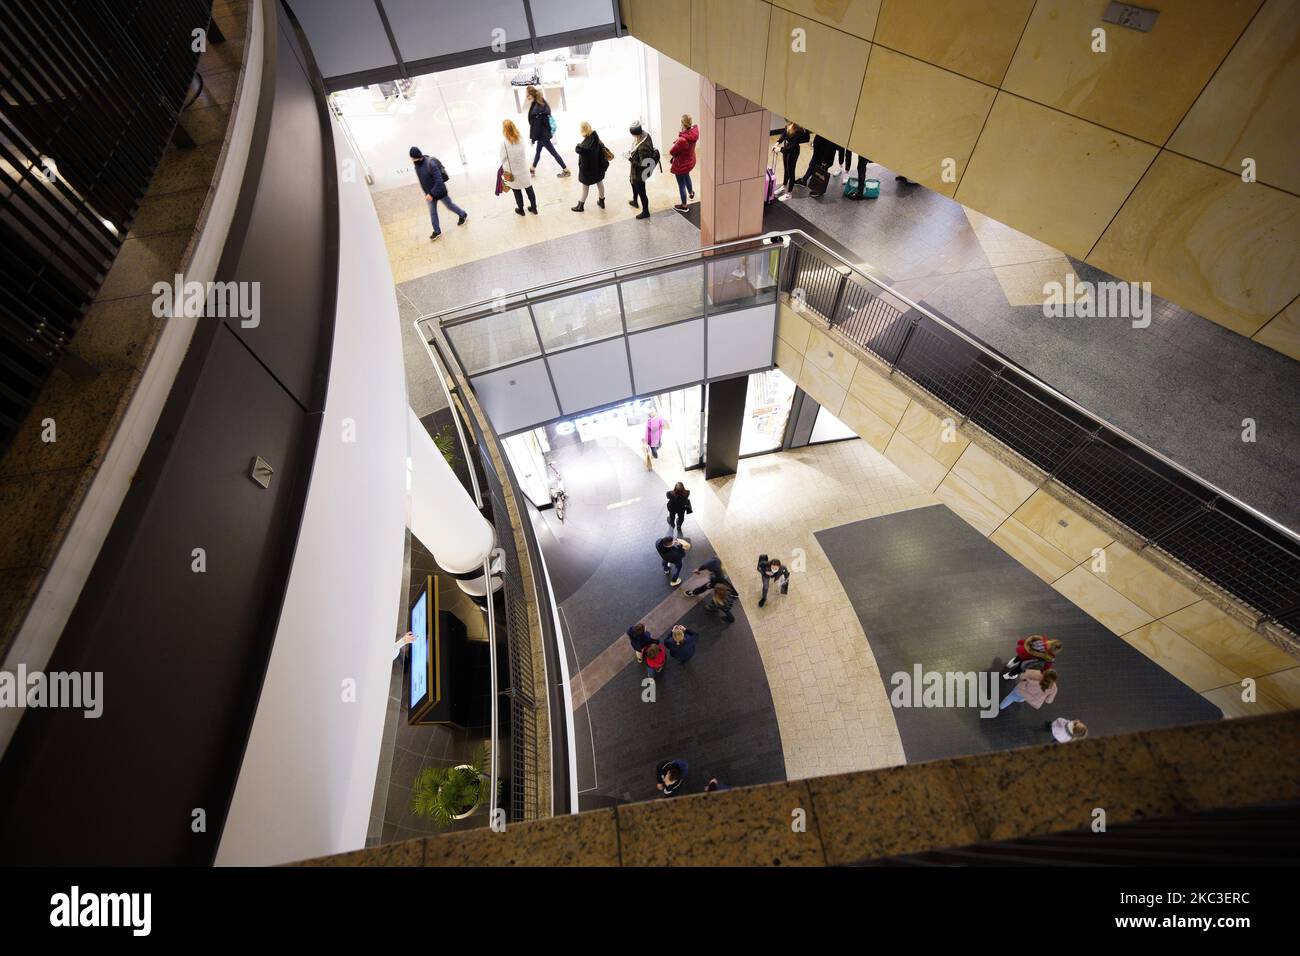 People wait in line at a fashion ratailer at a shopping mall in Warsaw, Poland on November 6, 2020. A partial lockdown will be imposed for two weeks starting on Saturday across the entire country. Daily cases of coronavirus infections have kept rising in the last two weeks despite restaurants and bars having been closed in addition to implementing distance learning for most grades in schools. To prevent a collapse of the overburdened healthcare system the Prime Minister's office announced new restrictions including the closing of shopping malls, hotels for tourists and mandatory distance learn Stock Photo